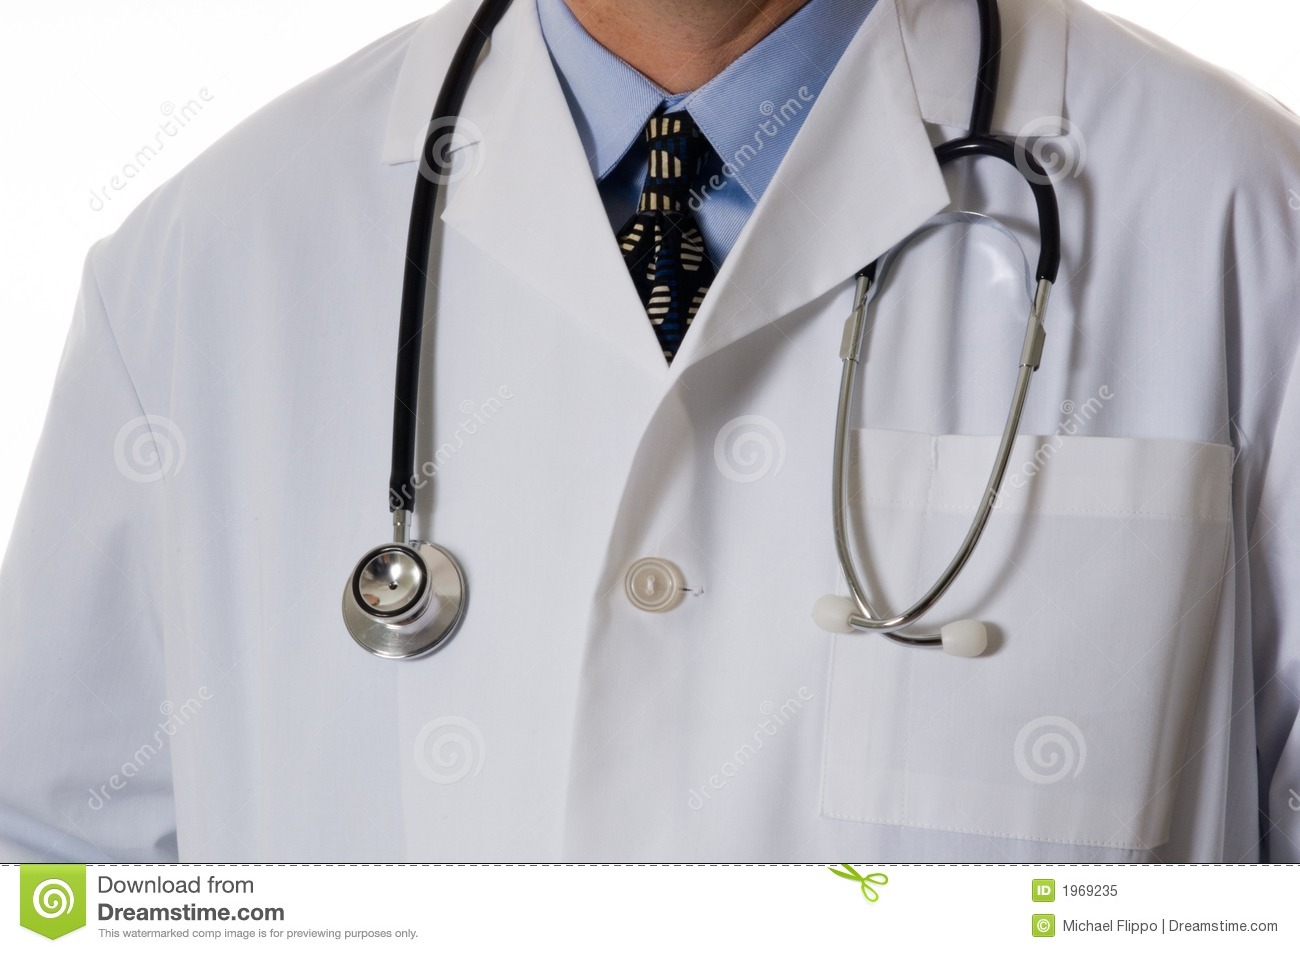 Doctor With Lab Coat And Stethoscope Royalty Free Stock Photo   Image